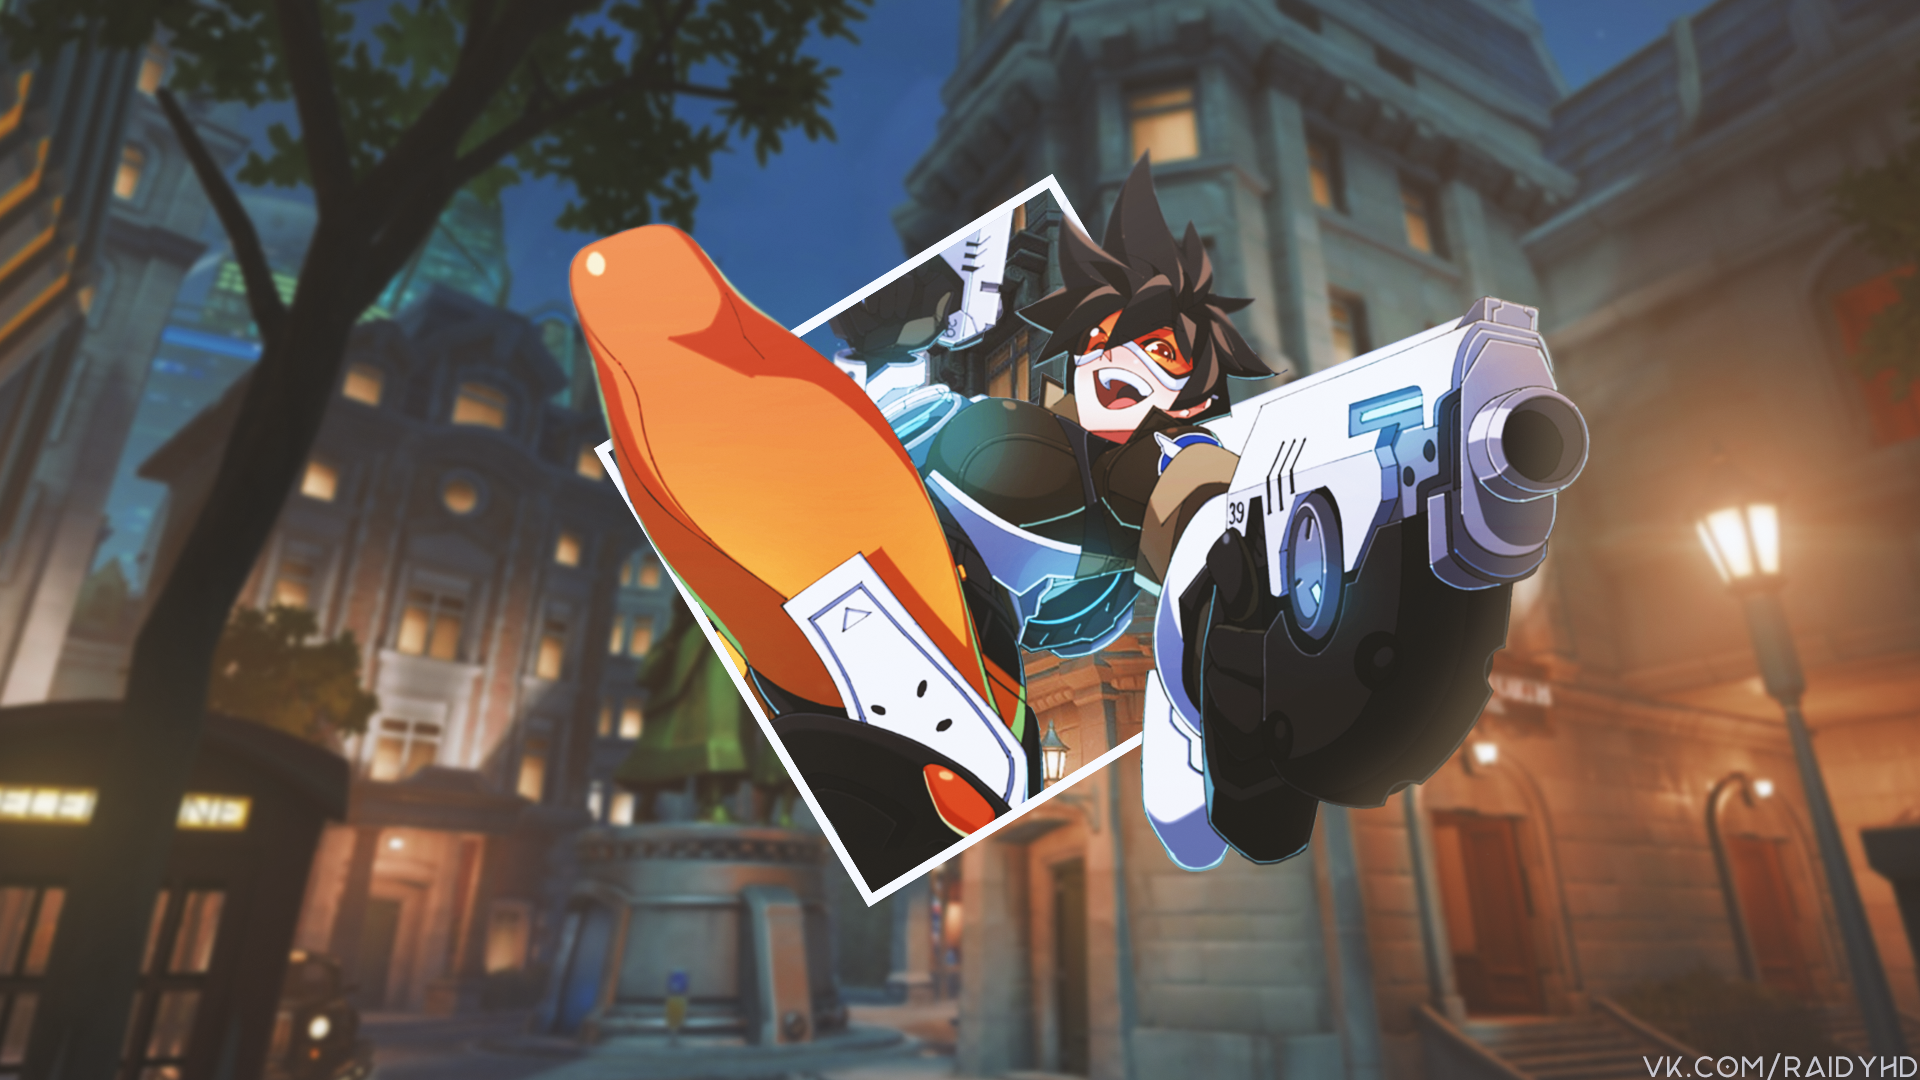 General 1920x1080 Overwatch Tracer (Overwatch) picture-in-picture video games video game characters Blizzard Entertainment British British women